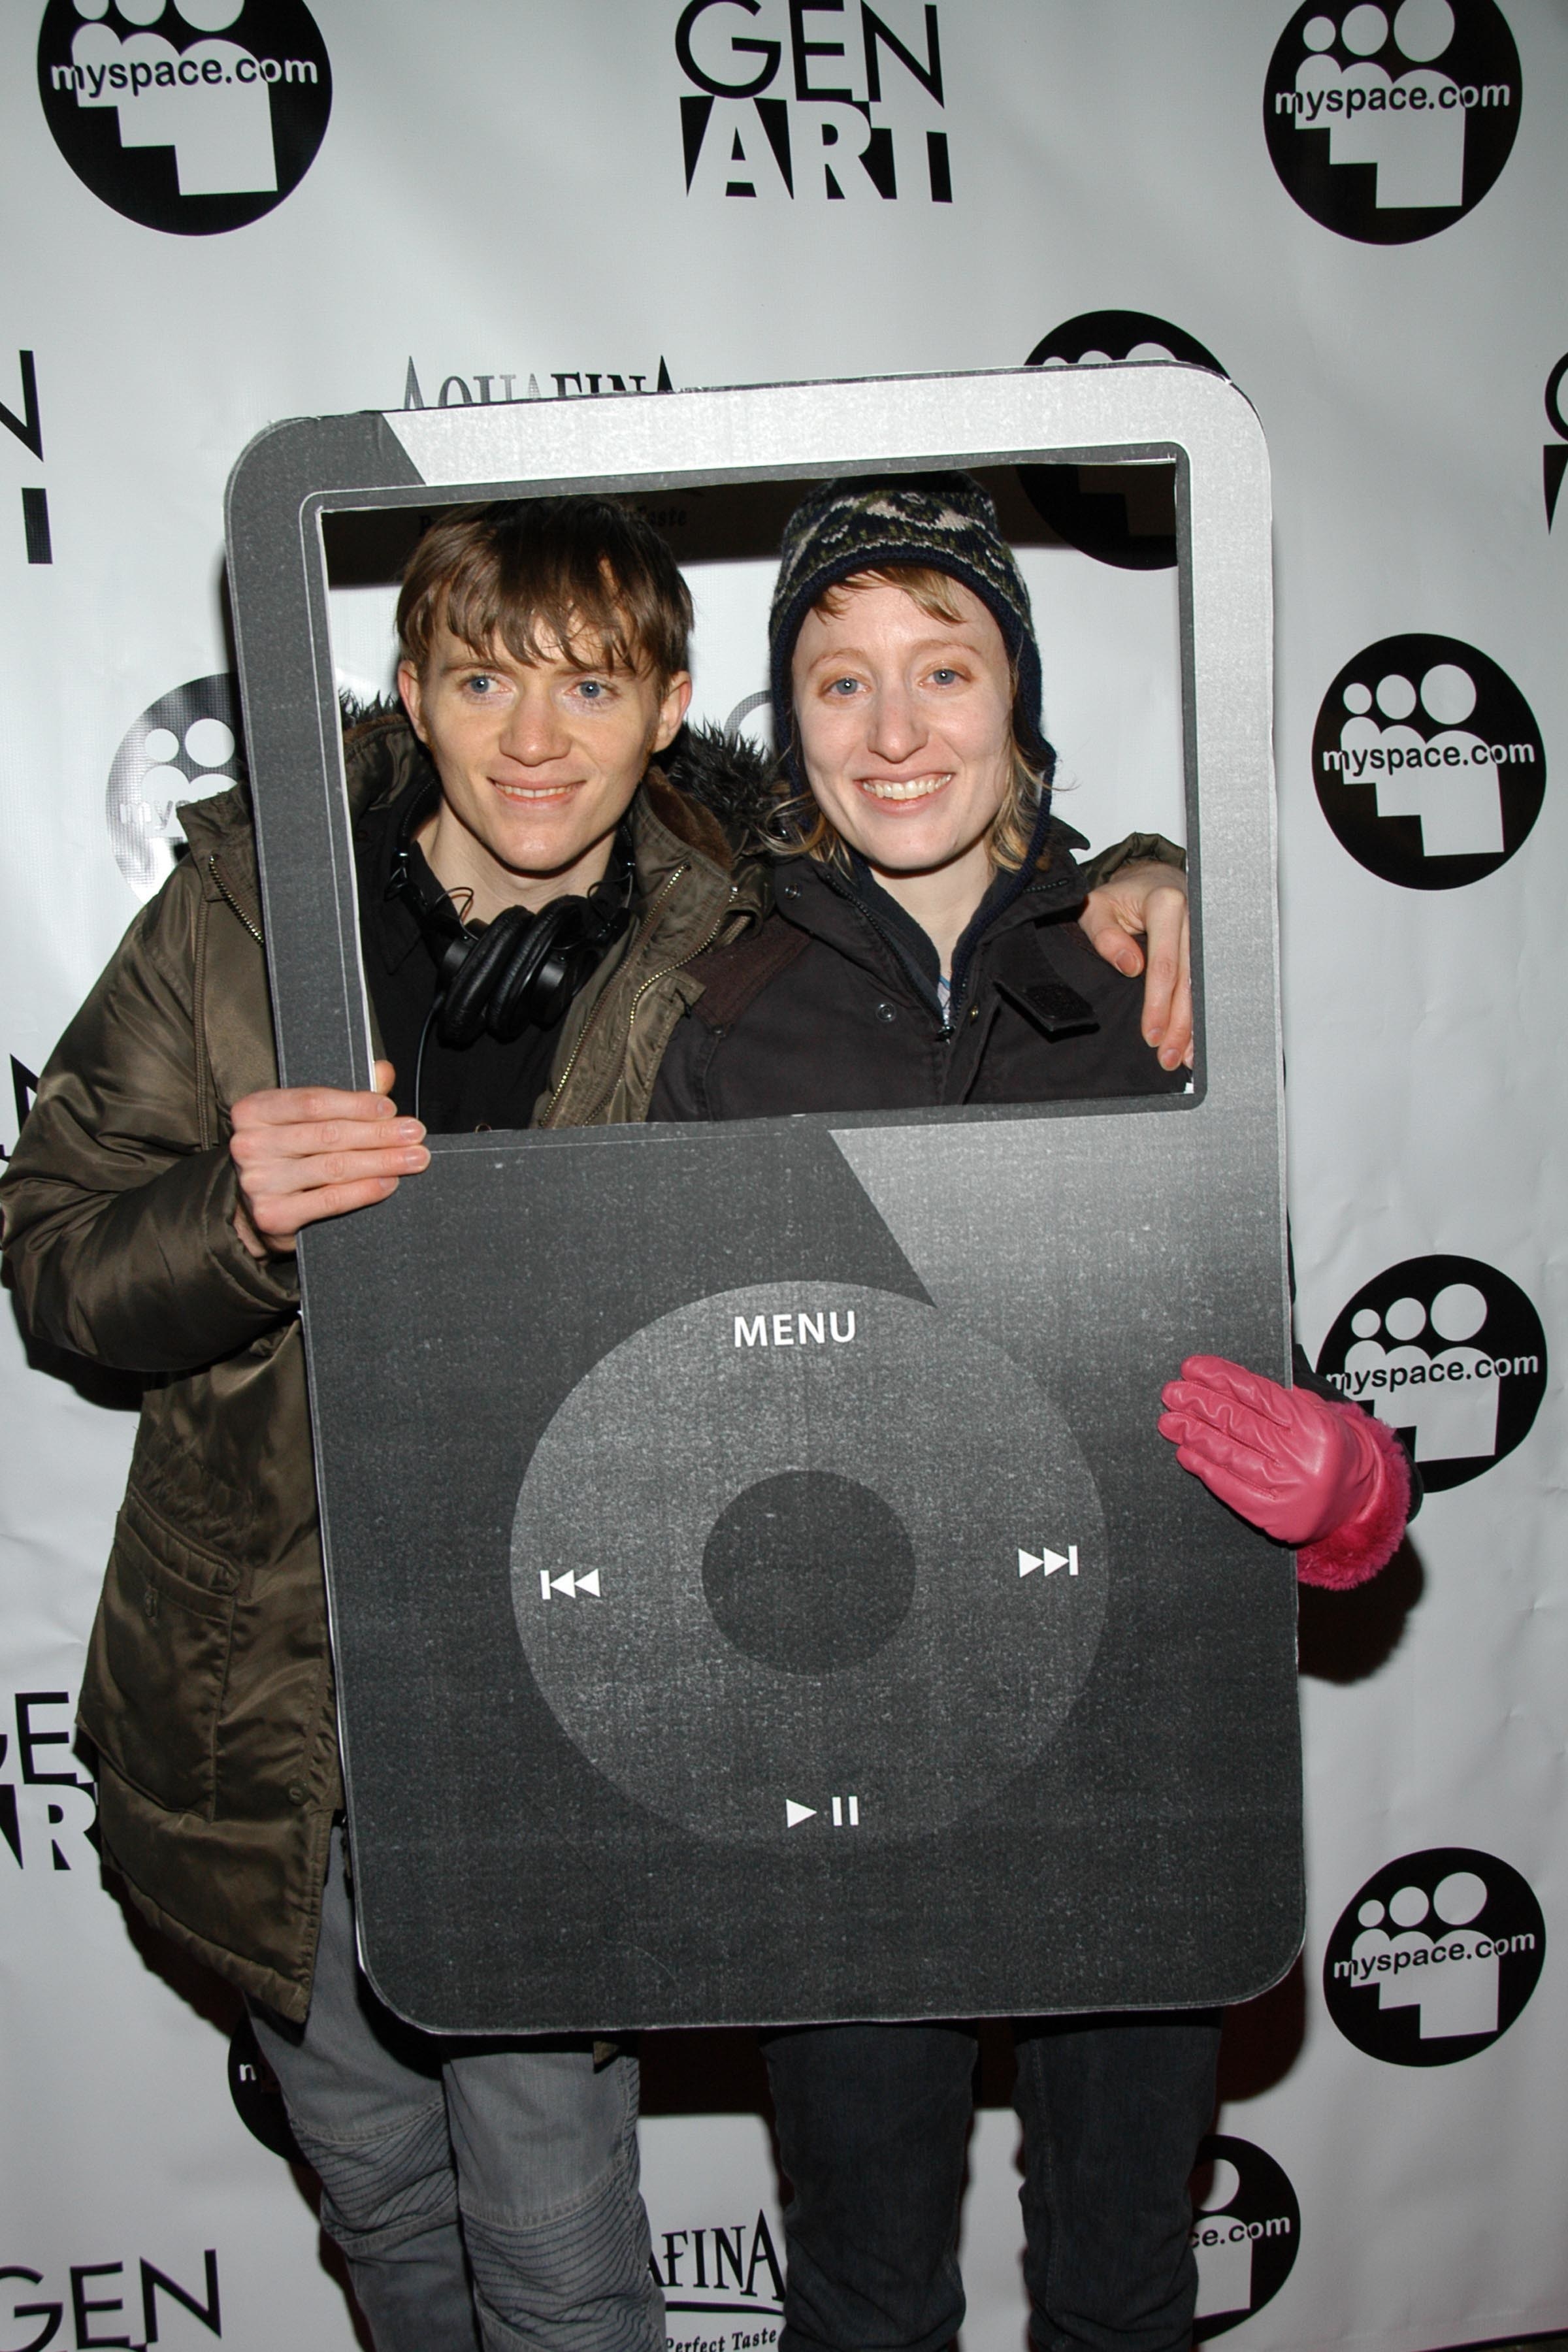 Two filmmakers arriving at the Myspace GenArt event while holding a giant black Classic iPod cutout prop.